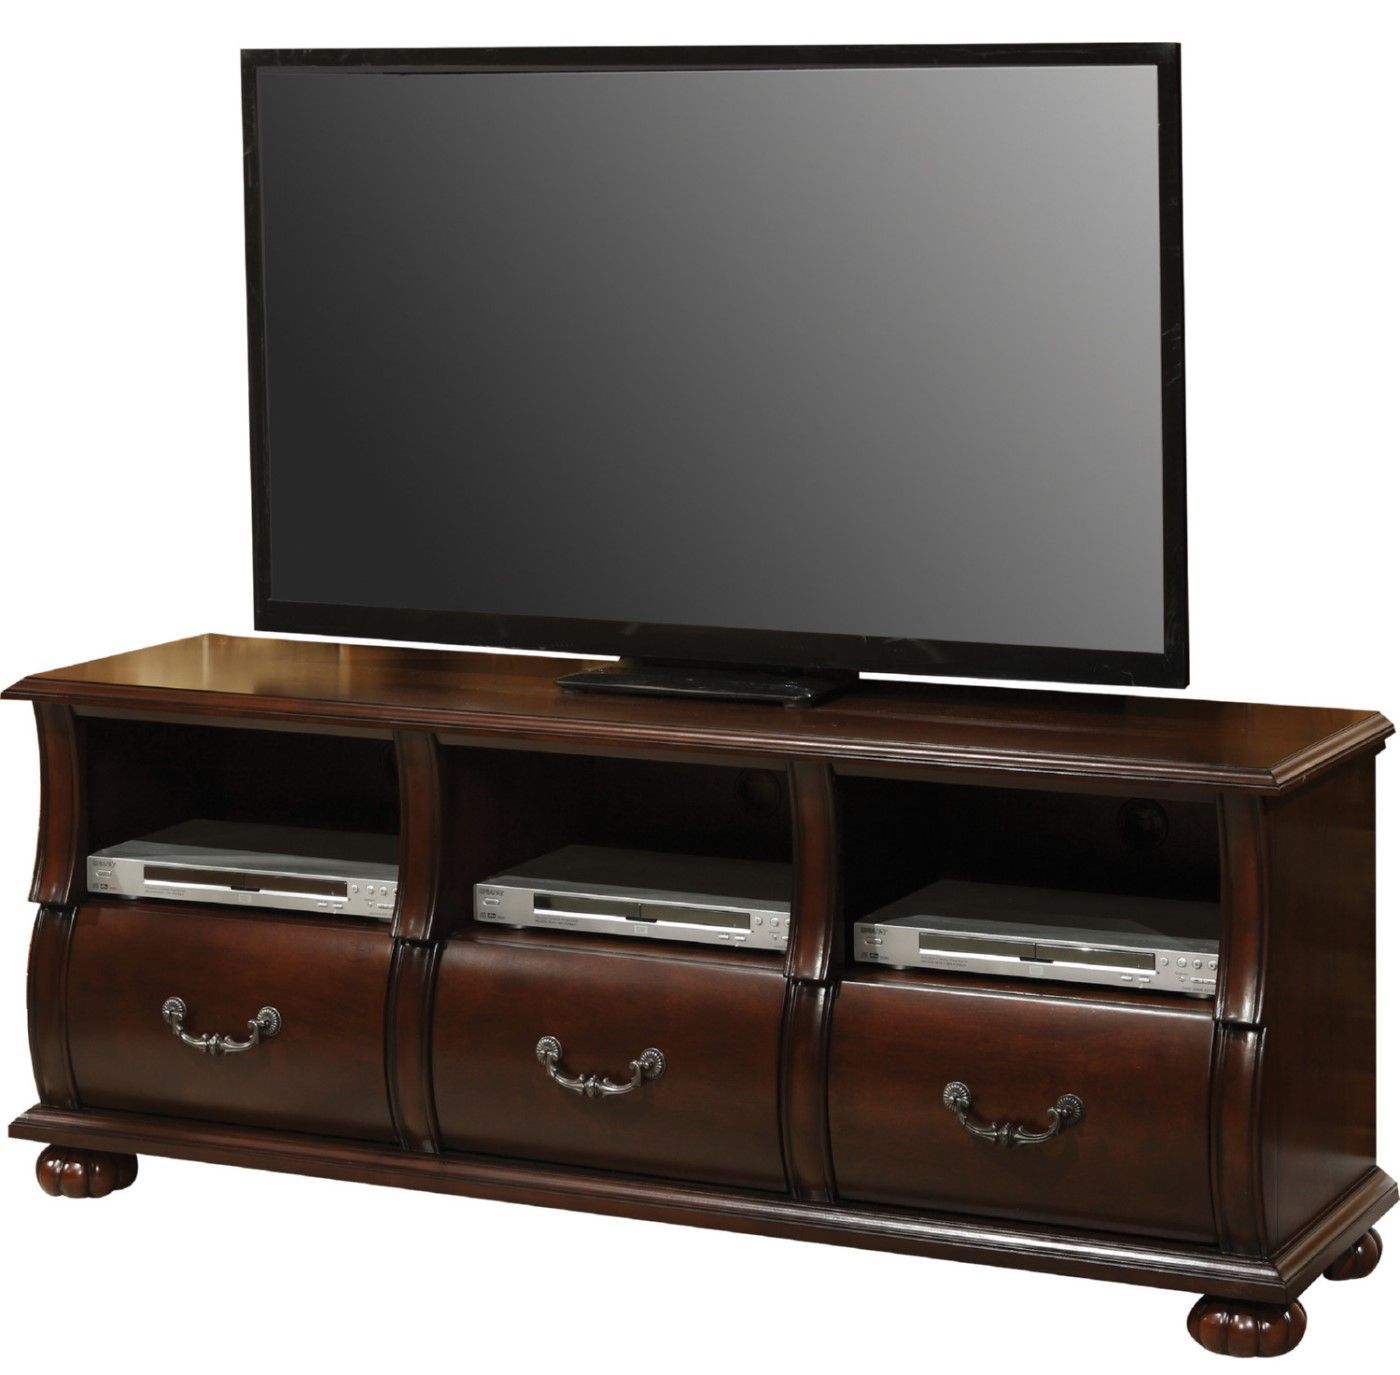 Prescott Traditional Dark Cherry Tv Stand With Serpentine Intended For Tabletop Tv Stand (View 13 of 15)